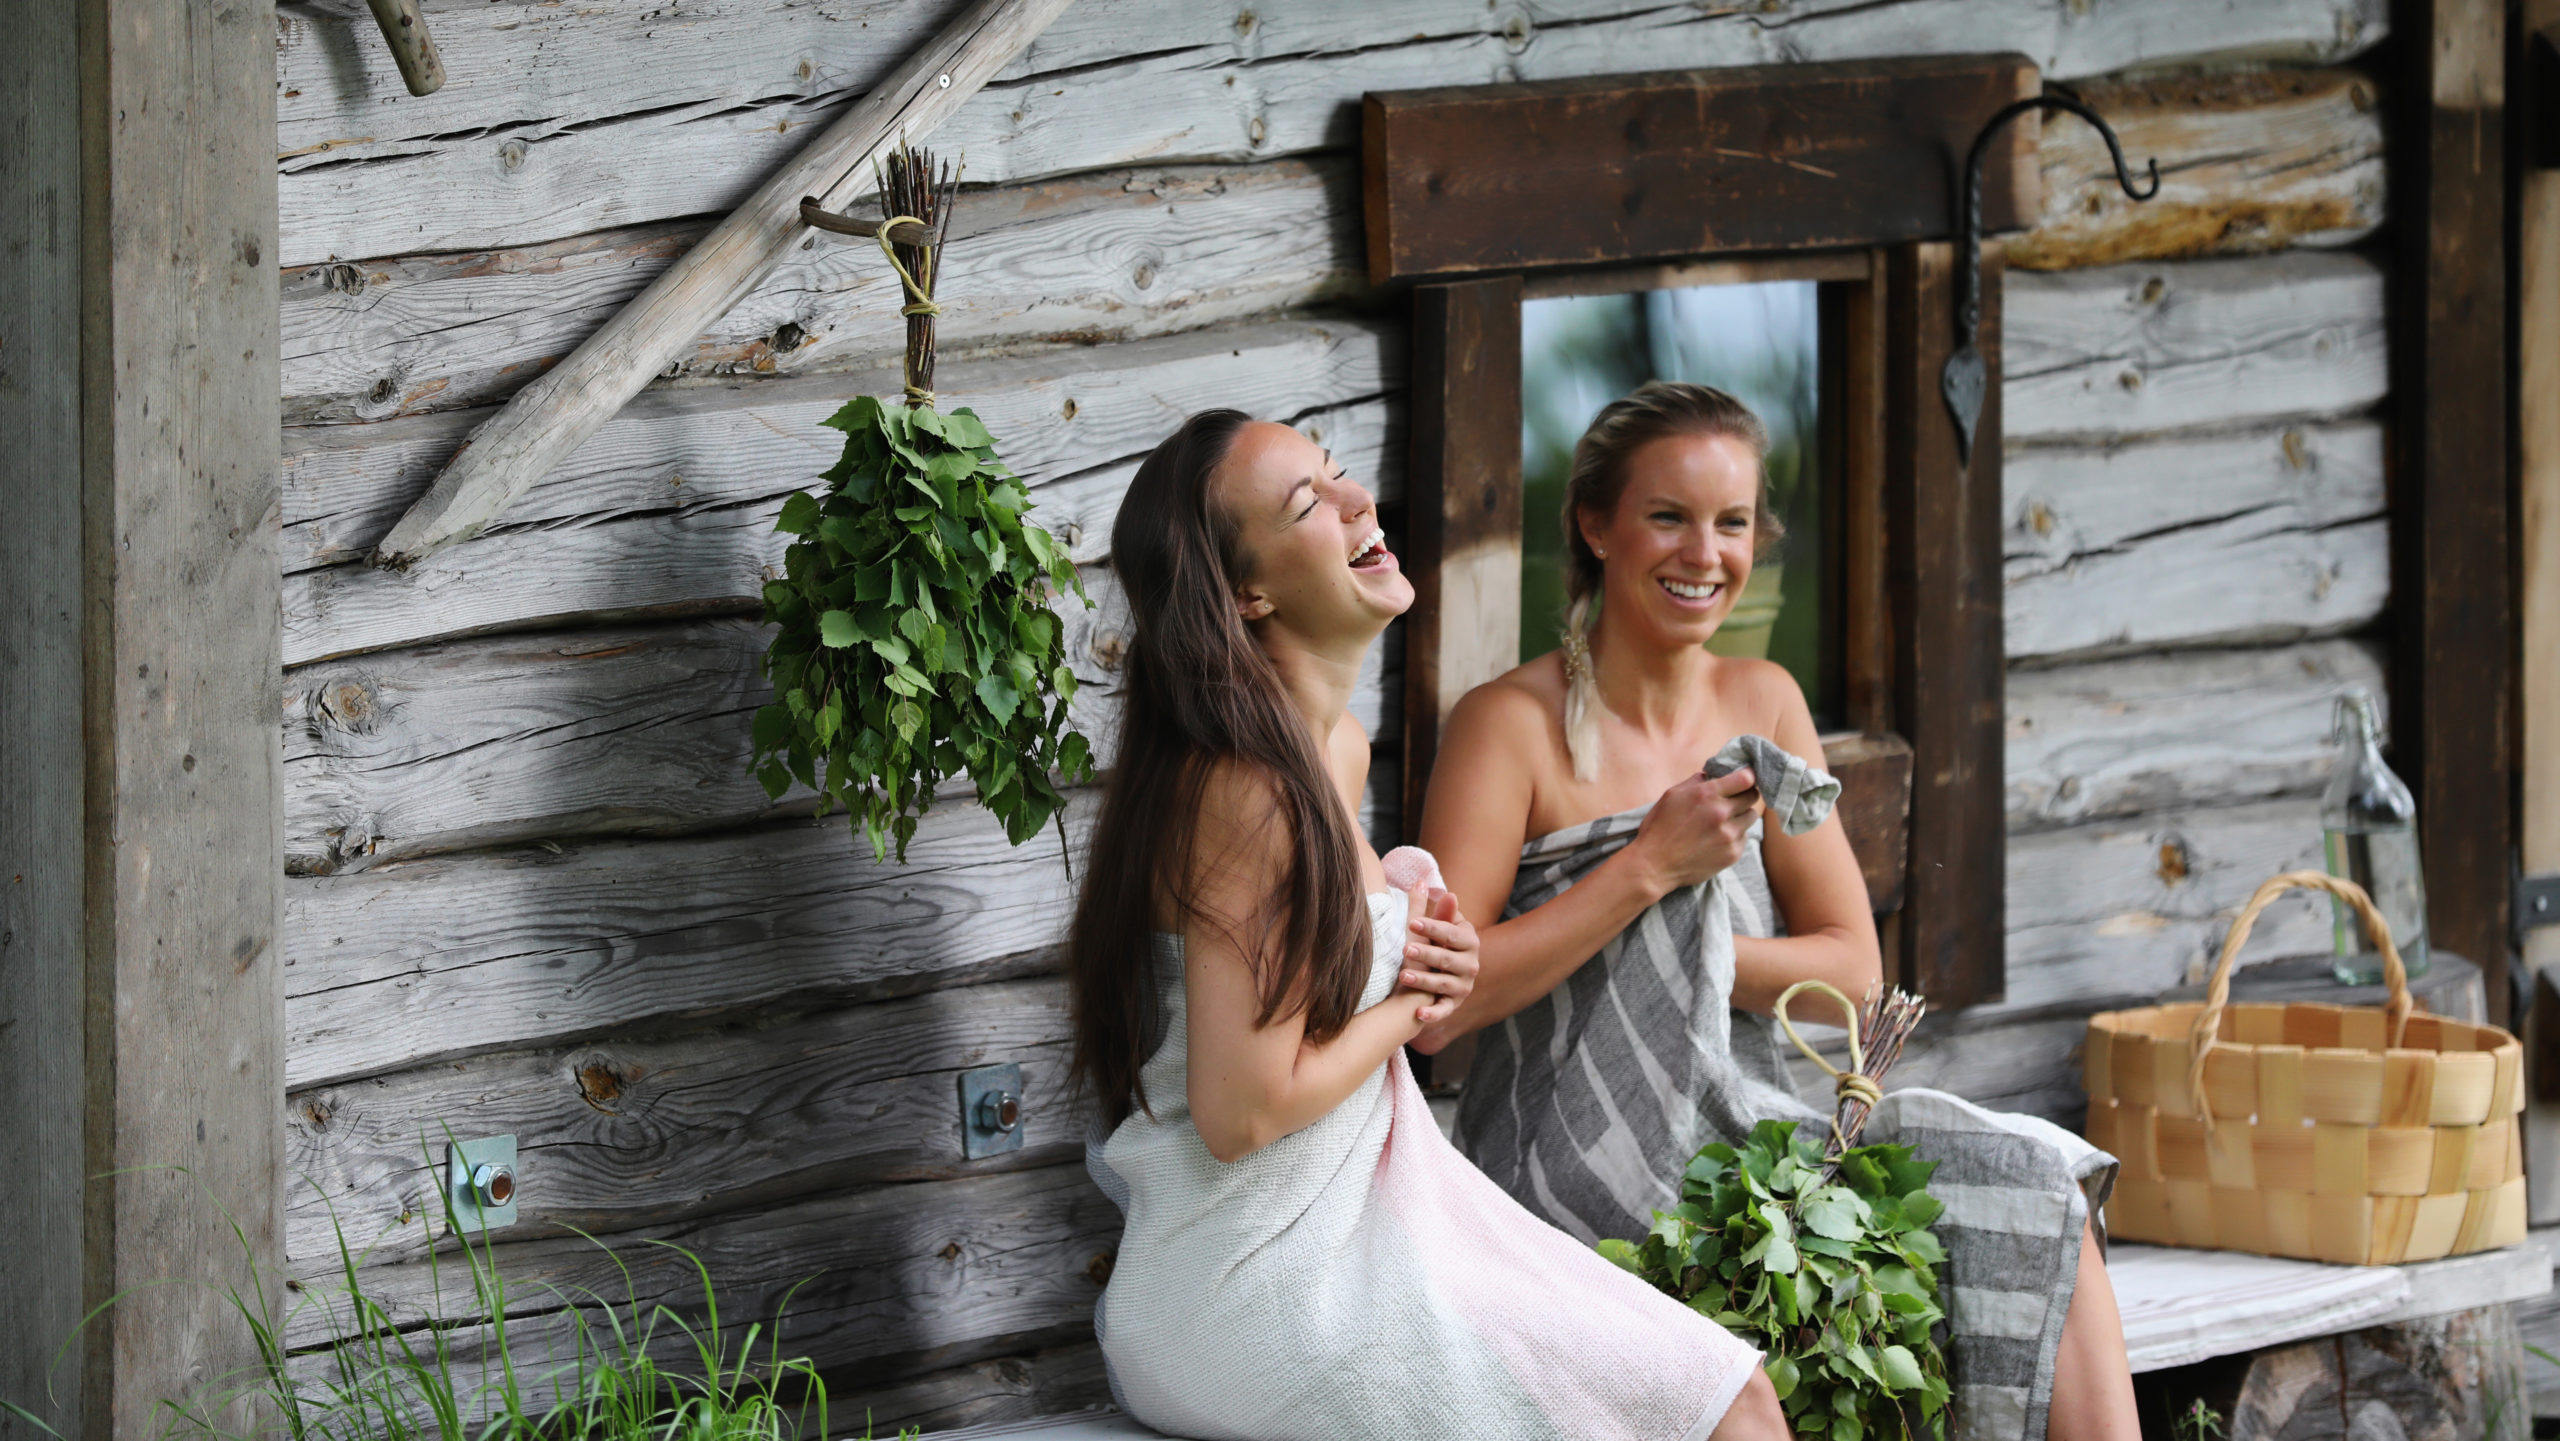 Two young ladies in front of wooden sauna.